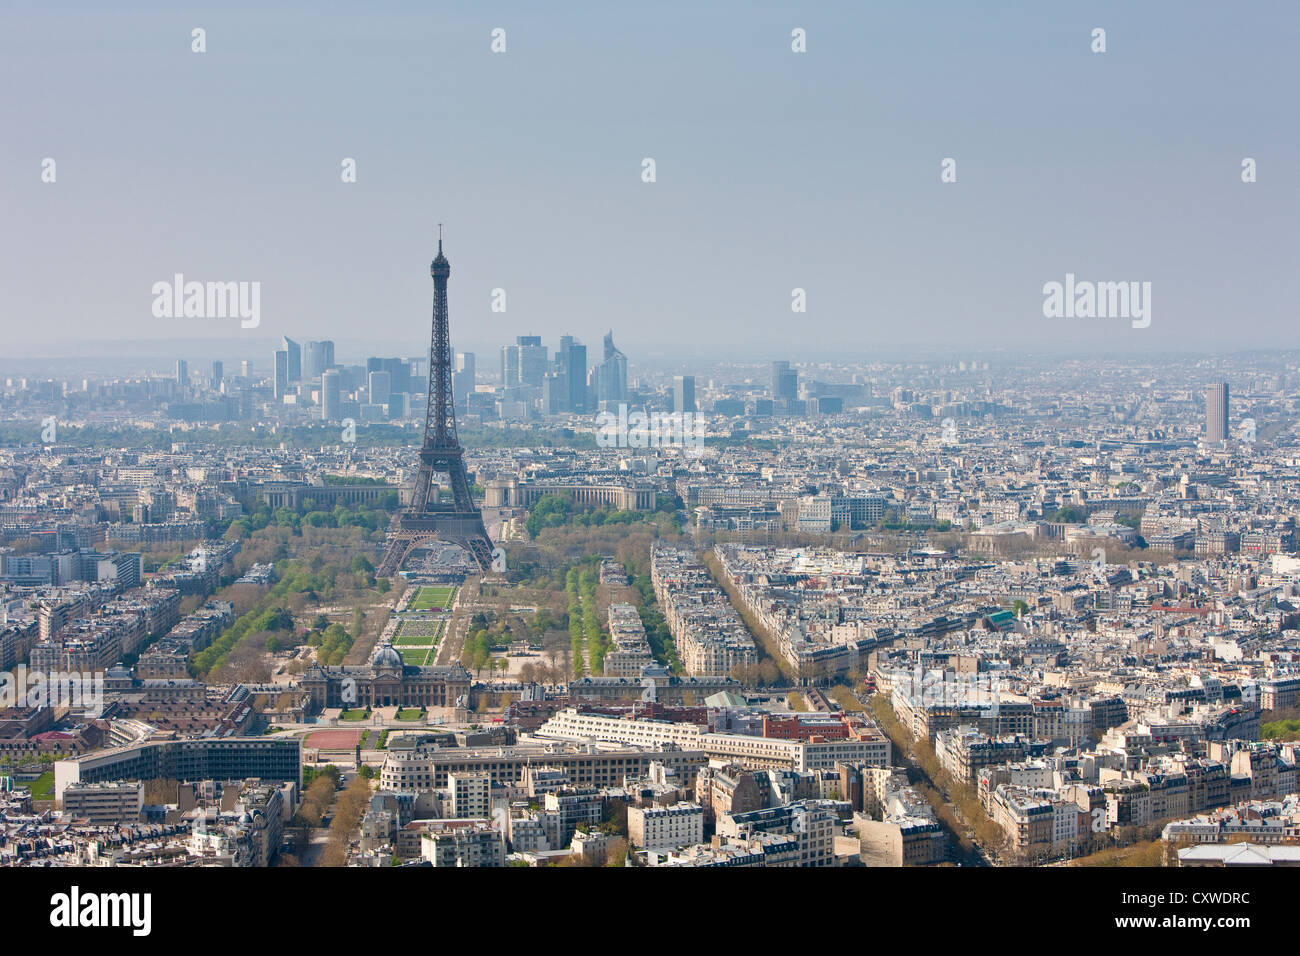 Aerial view of the Eiffel Tower and Champ de Mars in Paris, France Stock Photo